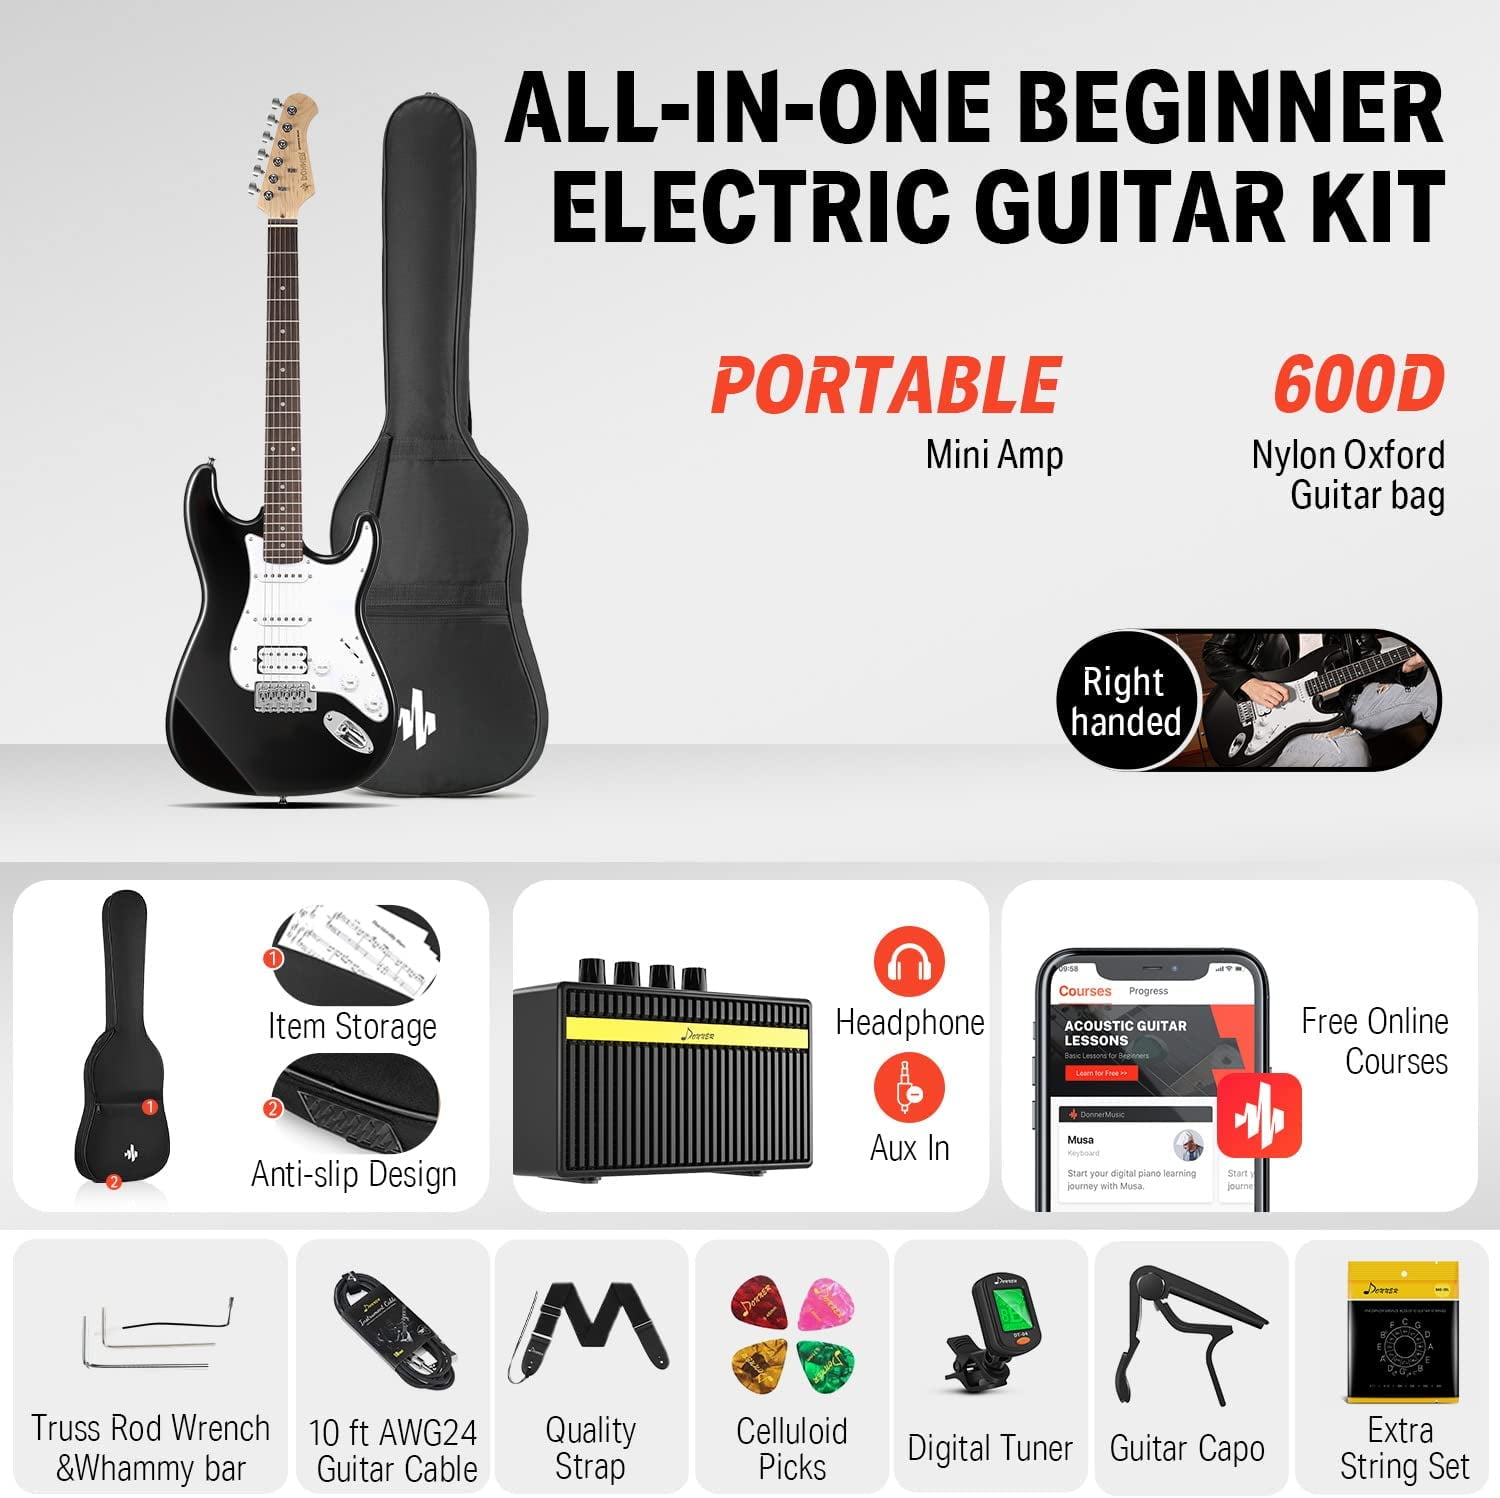 Donner DST-102B 39 Inch Full Size Electric Guitar Kit Bundle with Guitar Headphone Amp Mini Turbo 